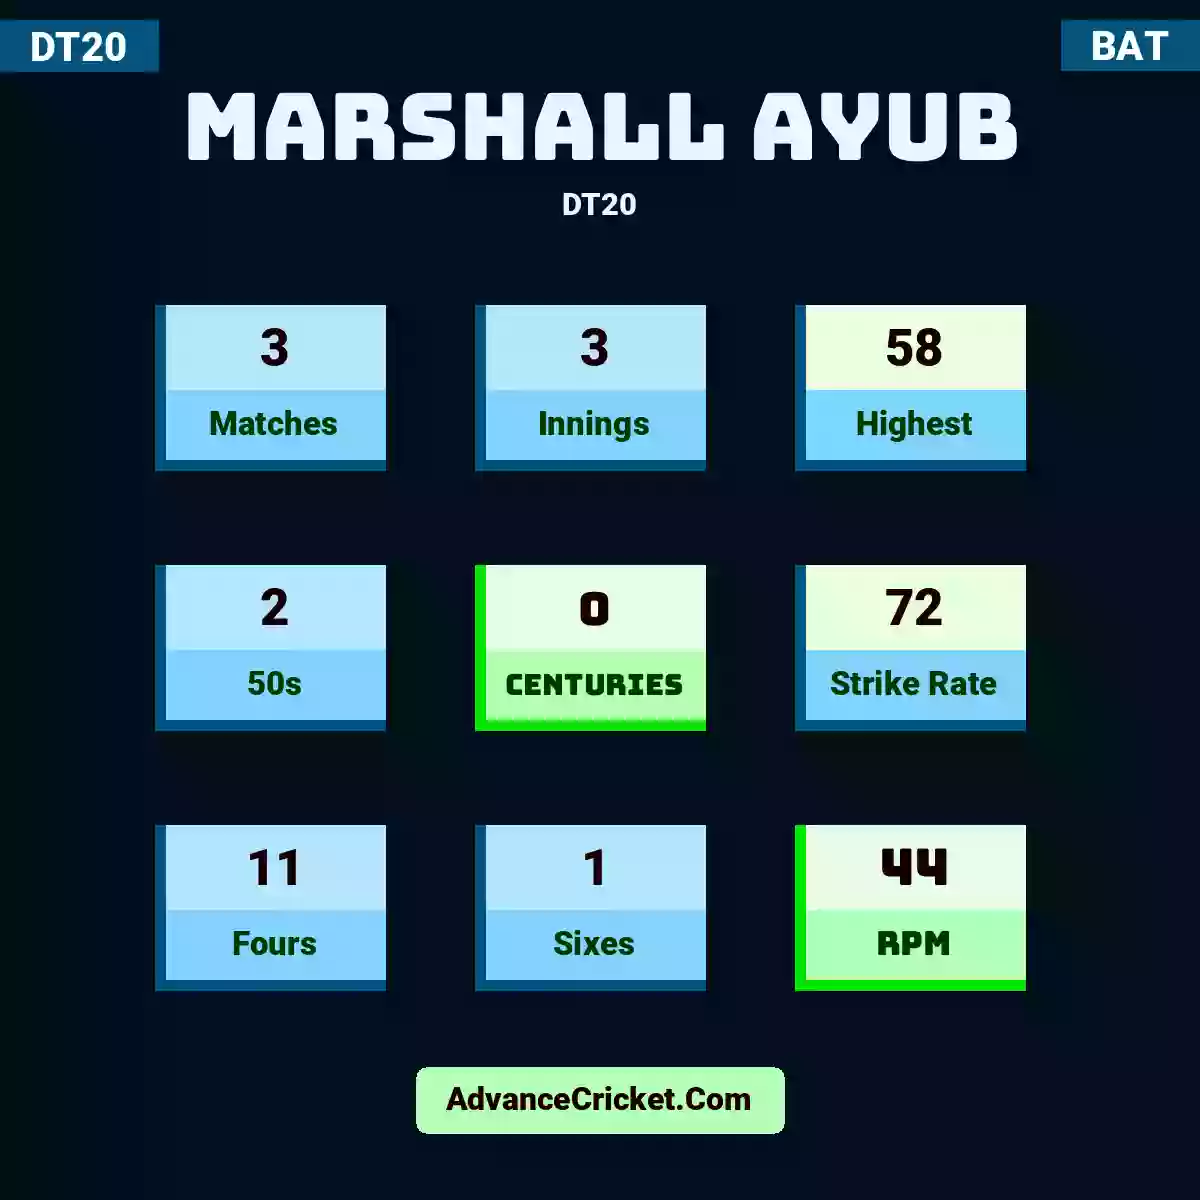 Marshall Ayub DT20 , Marshall Ayub played 3 matches, scored 58 runs as highest, 2 half-centuries, and 0 centuries, with a strike rate of 72. M.Ayub hit 11 fours and 1 sixes, with an RPM of 44.